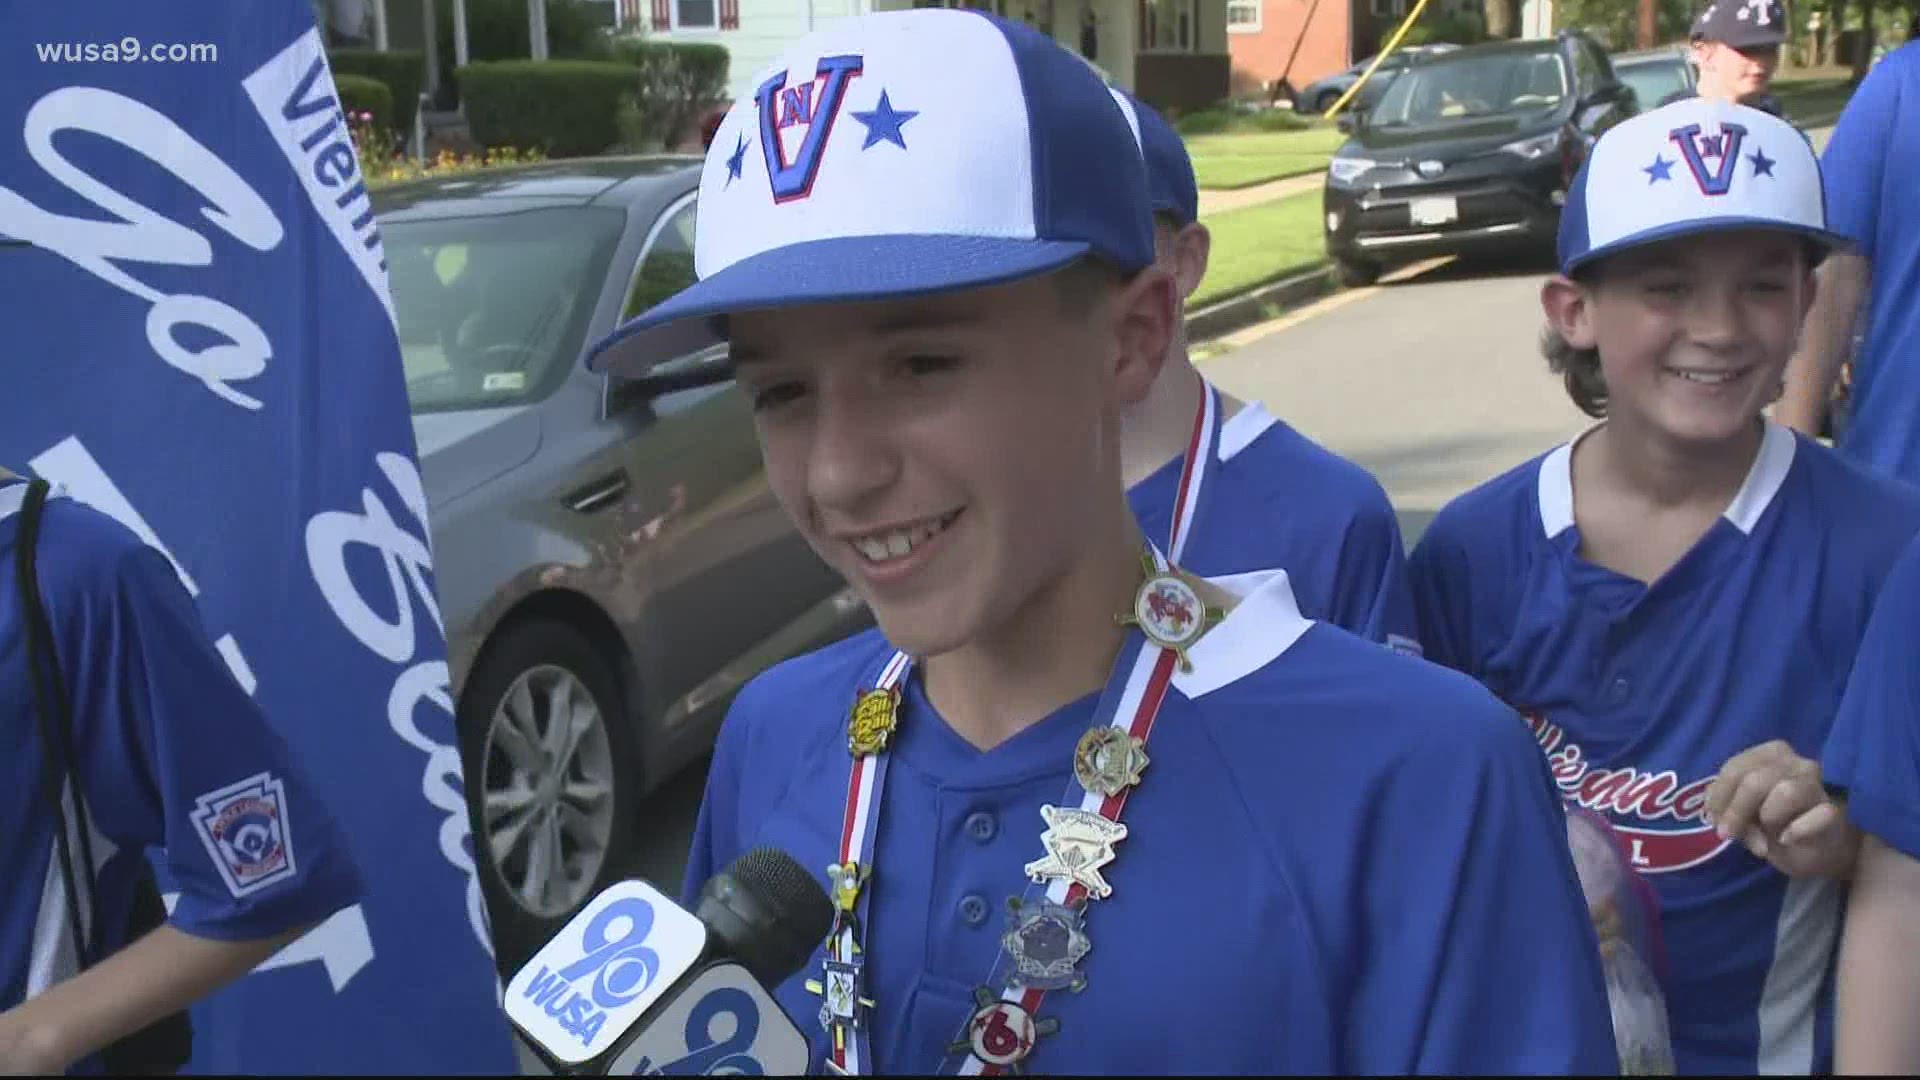 16 teams in the commonwealth are vying for a trip to the Little League World Series.